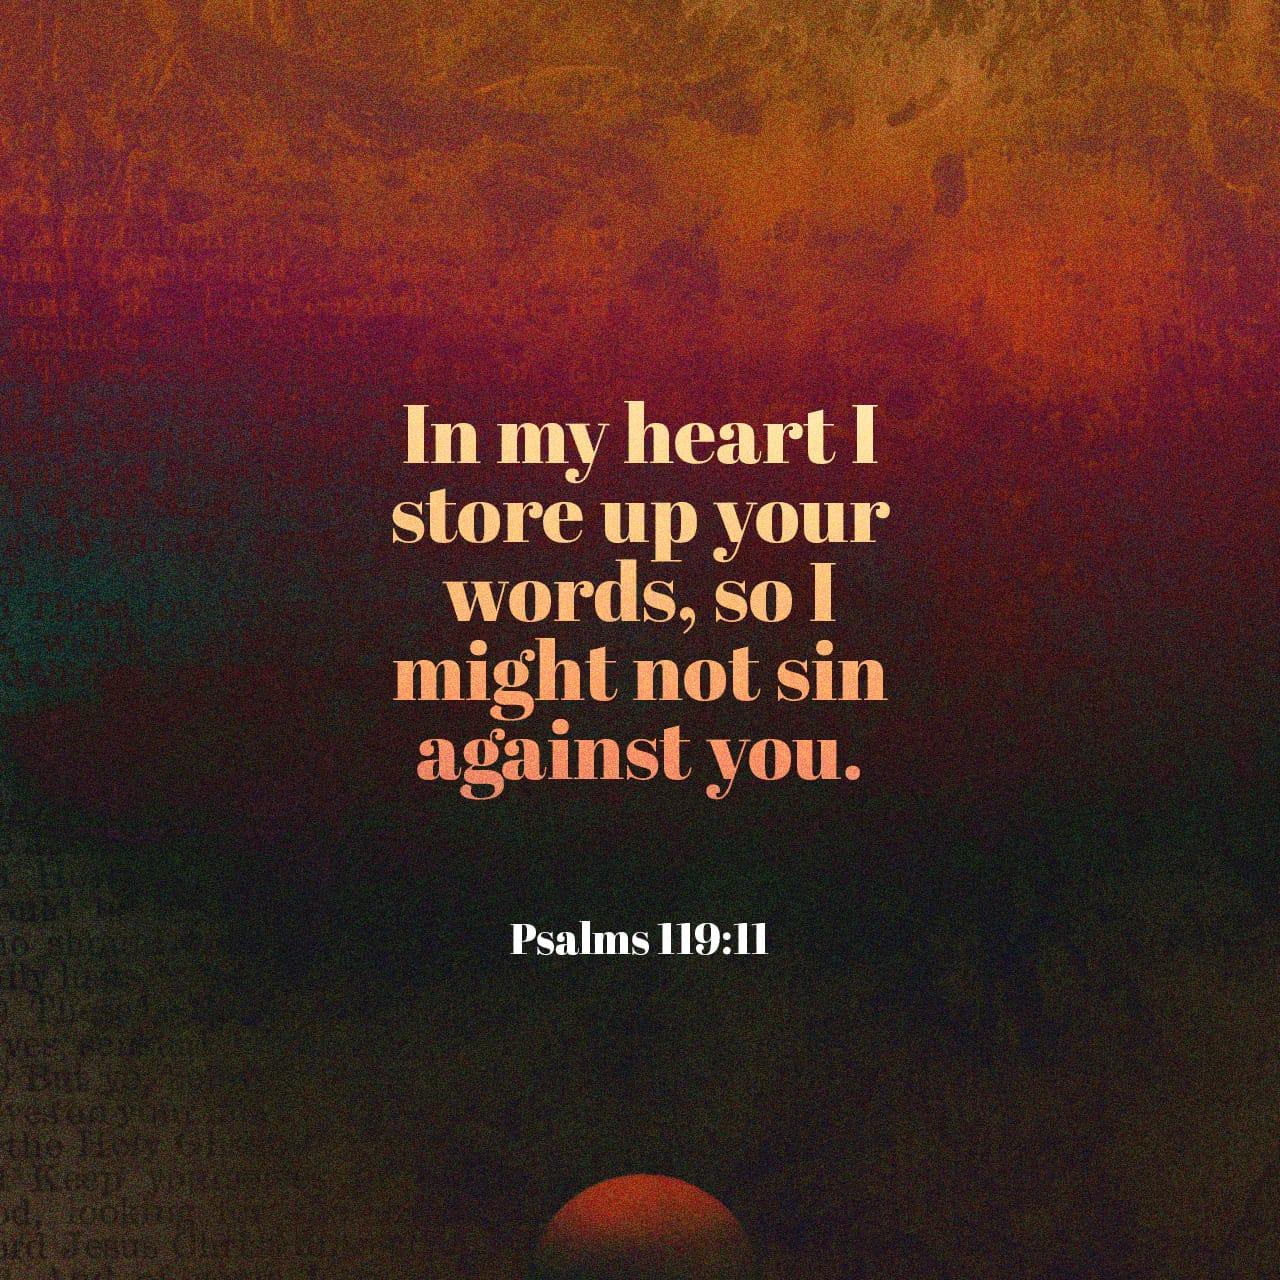 Bible Verse of the Day - day 154 - image 36060 (Psalm 119:11)